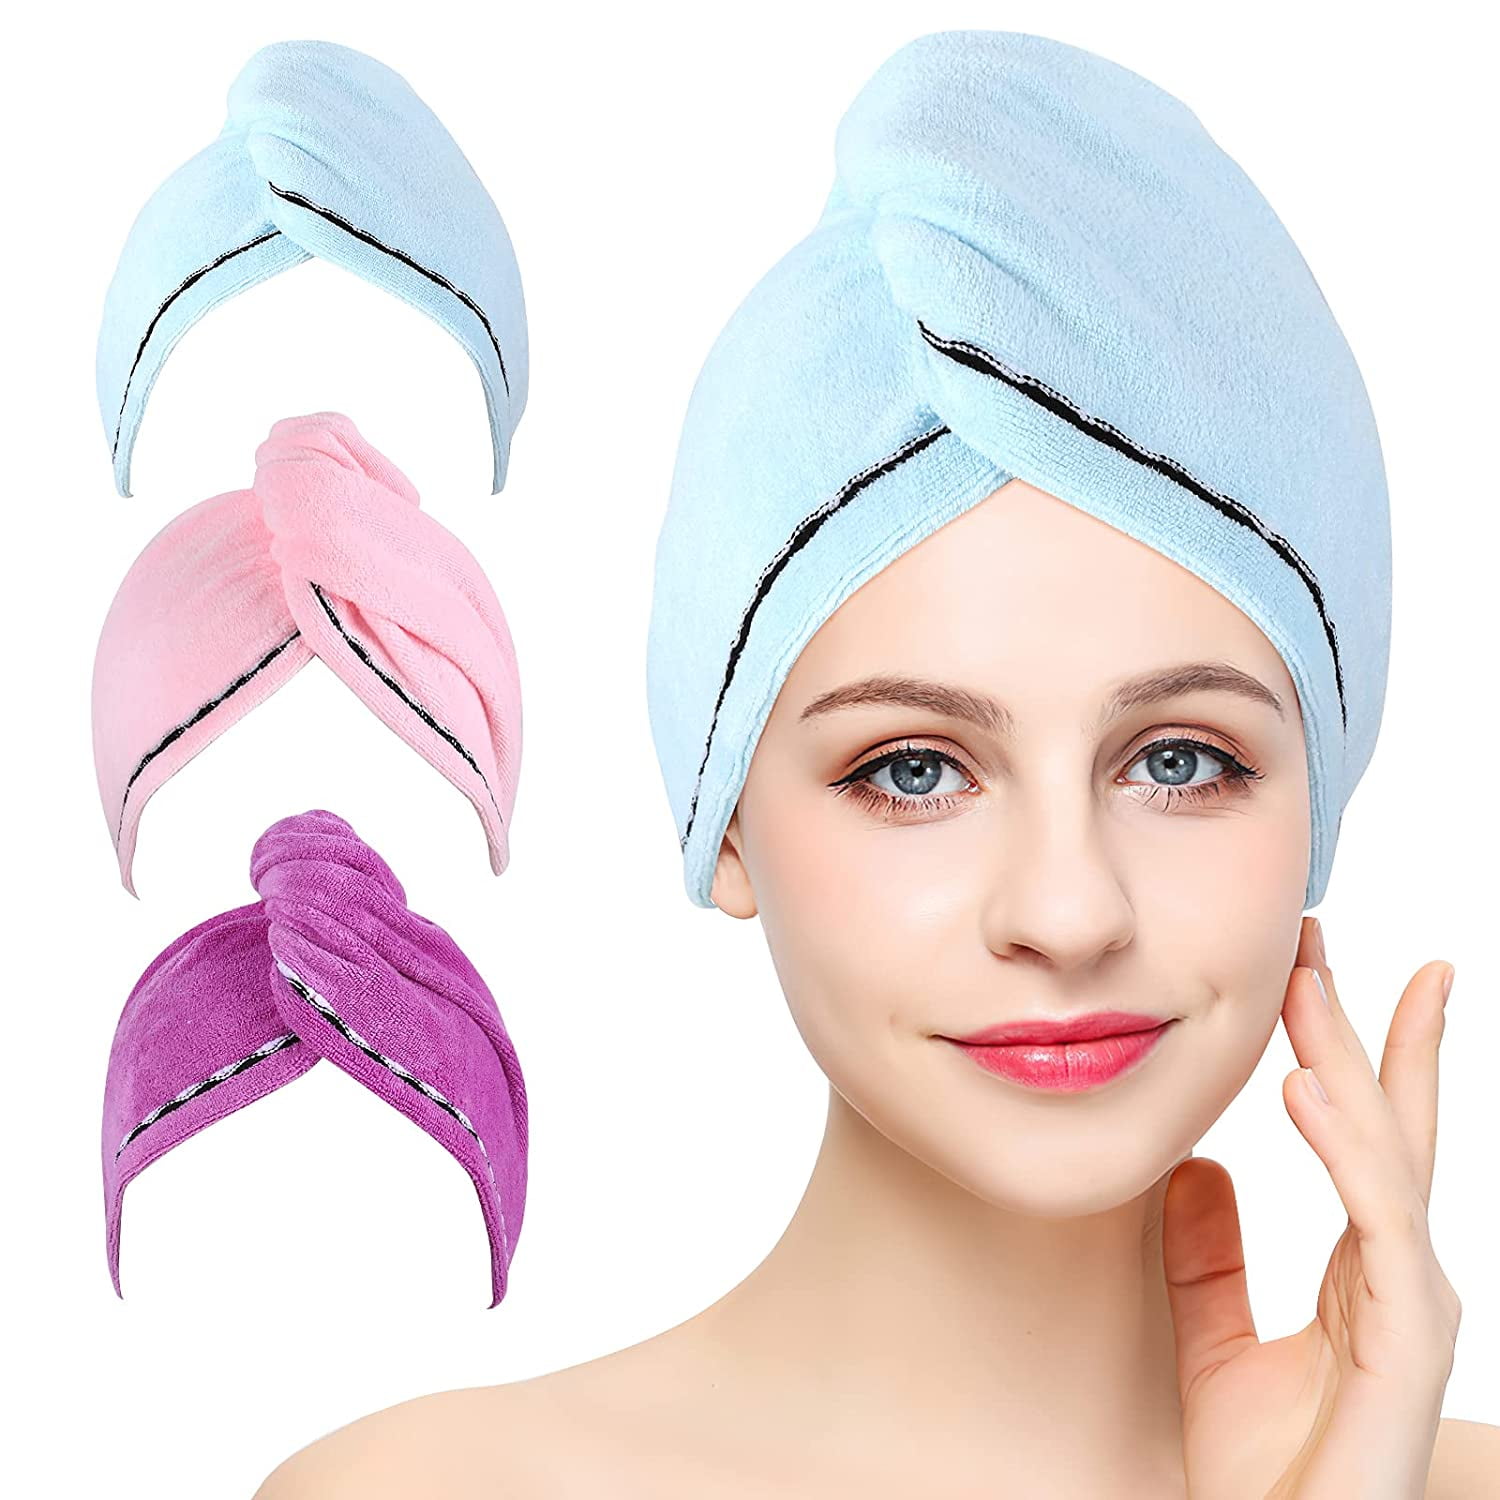 Microfiber Hair Towel,3 Packs Hair Turbans for Wet Hair, Drying Hair Wrap  Towels for Curly Hair Women Anti Frizz,Super Absorbent Quick Dry Hair Turban  for Drying Curly, Long & Thick Hair -